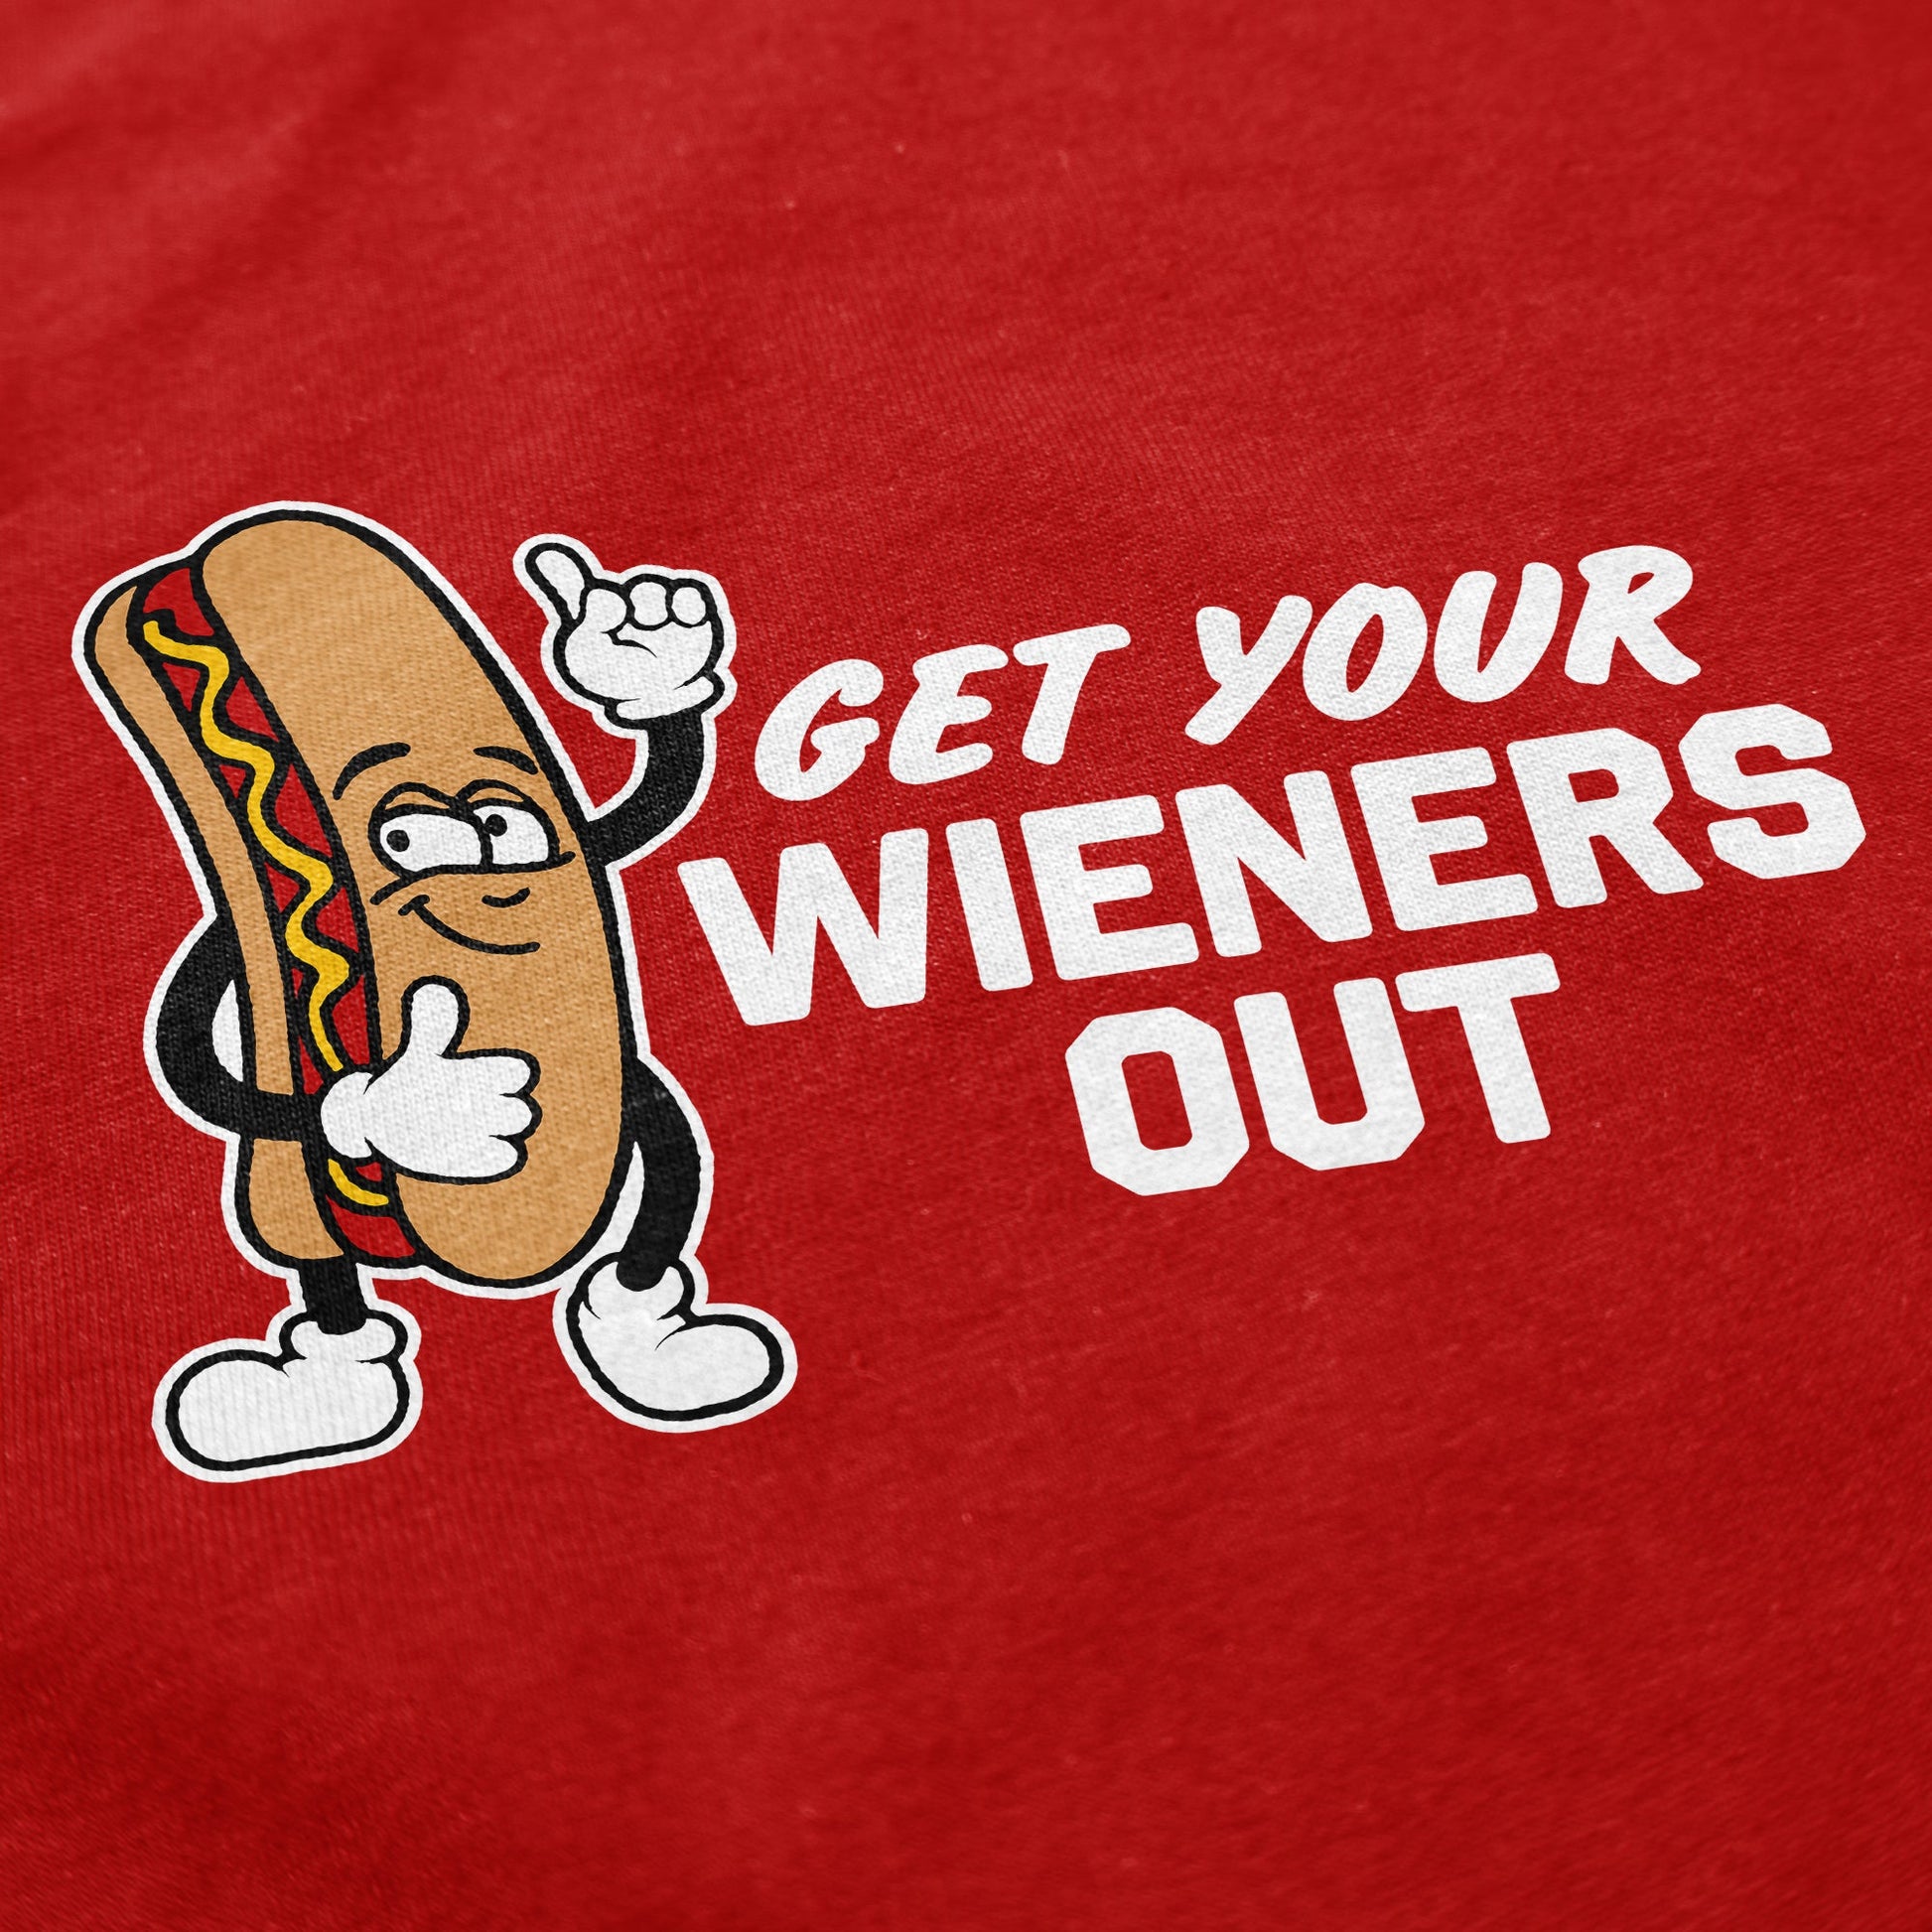 Get your wieners out T Shirt - Shitheadsteve